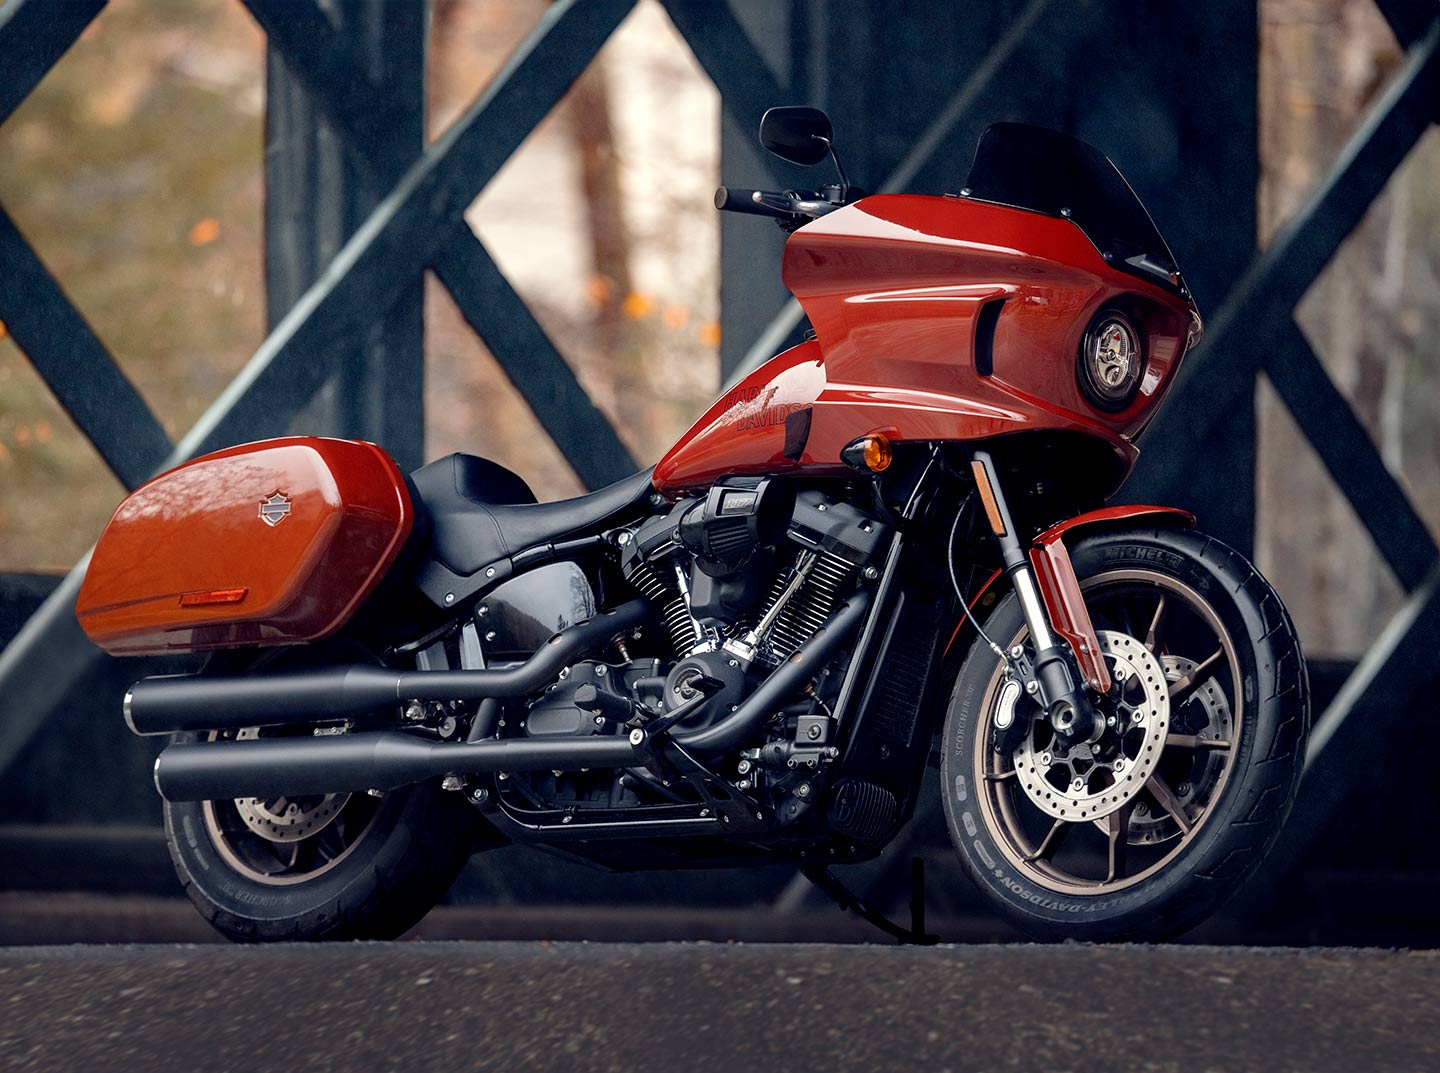 H-D designers did a great job of modernizing the FXRT-inspired fairing.